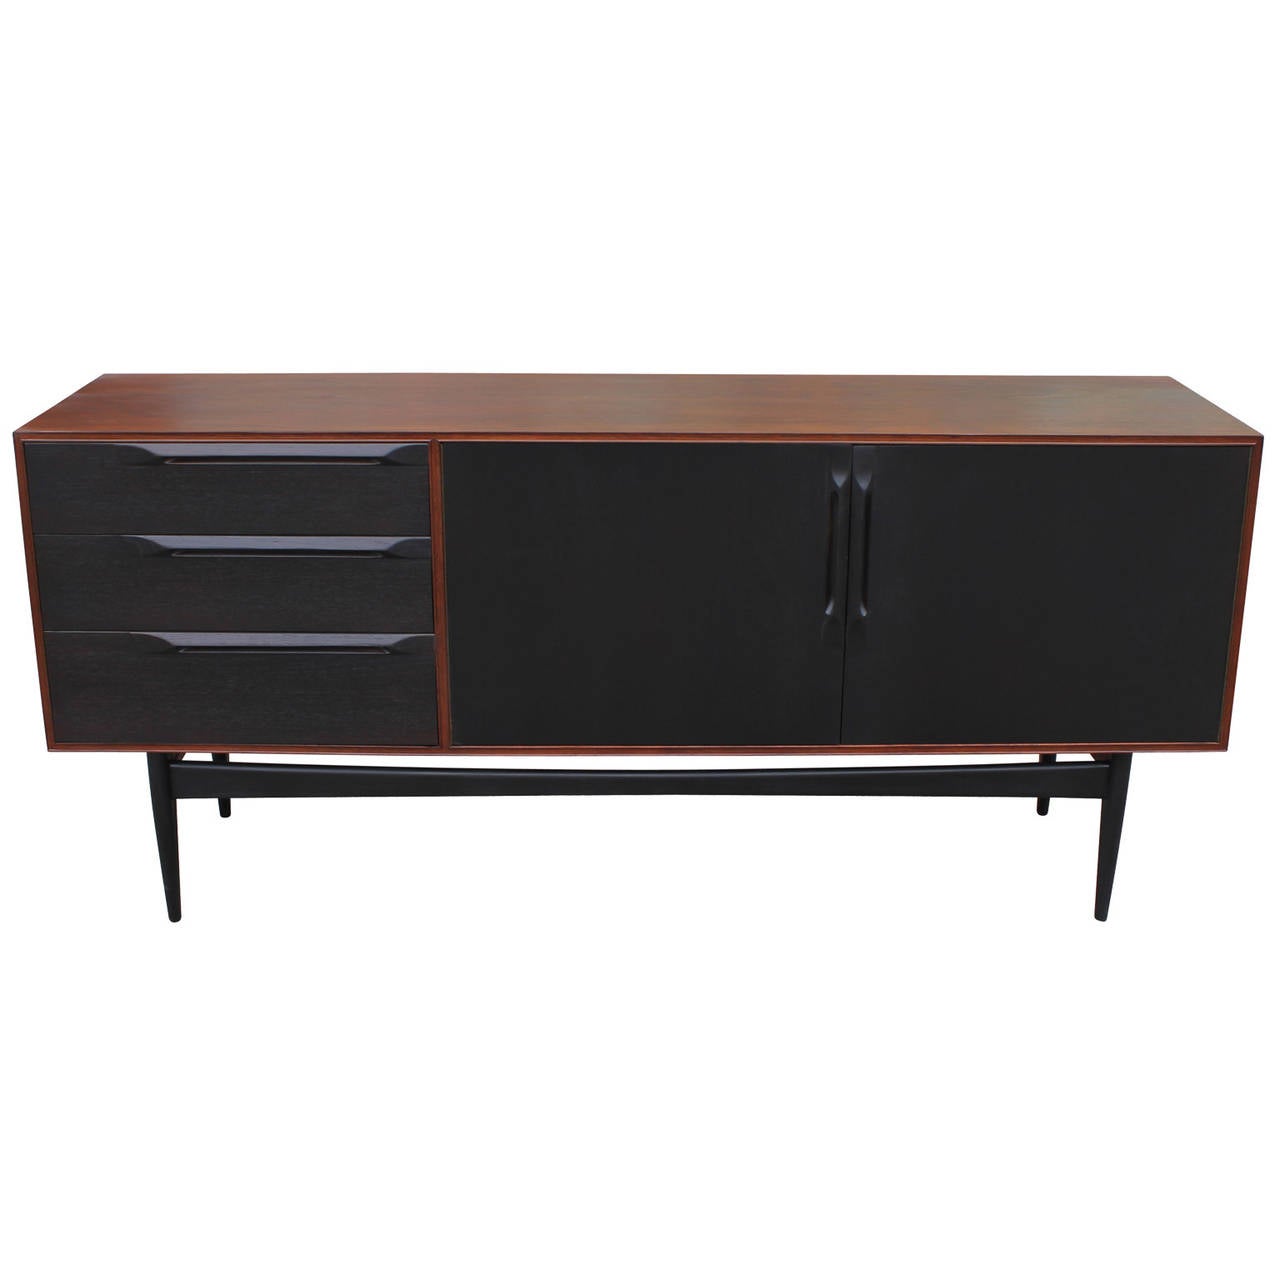 Sleek two tone sideboard with a walnut color shell and ebonized middle. Sideboard has been professionally restored. Beautiful piece.